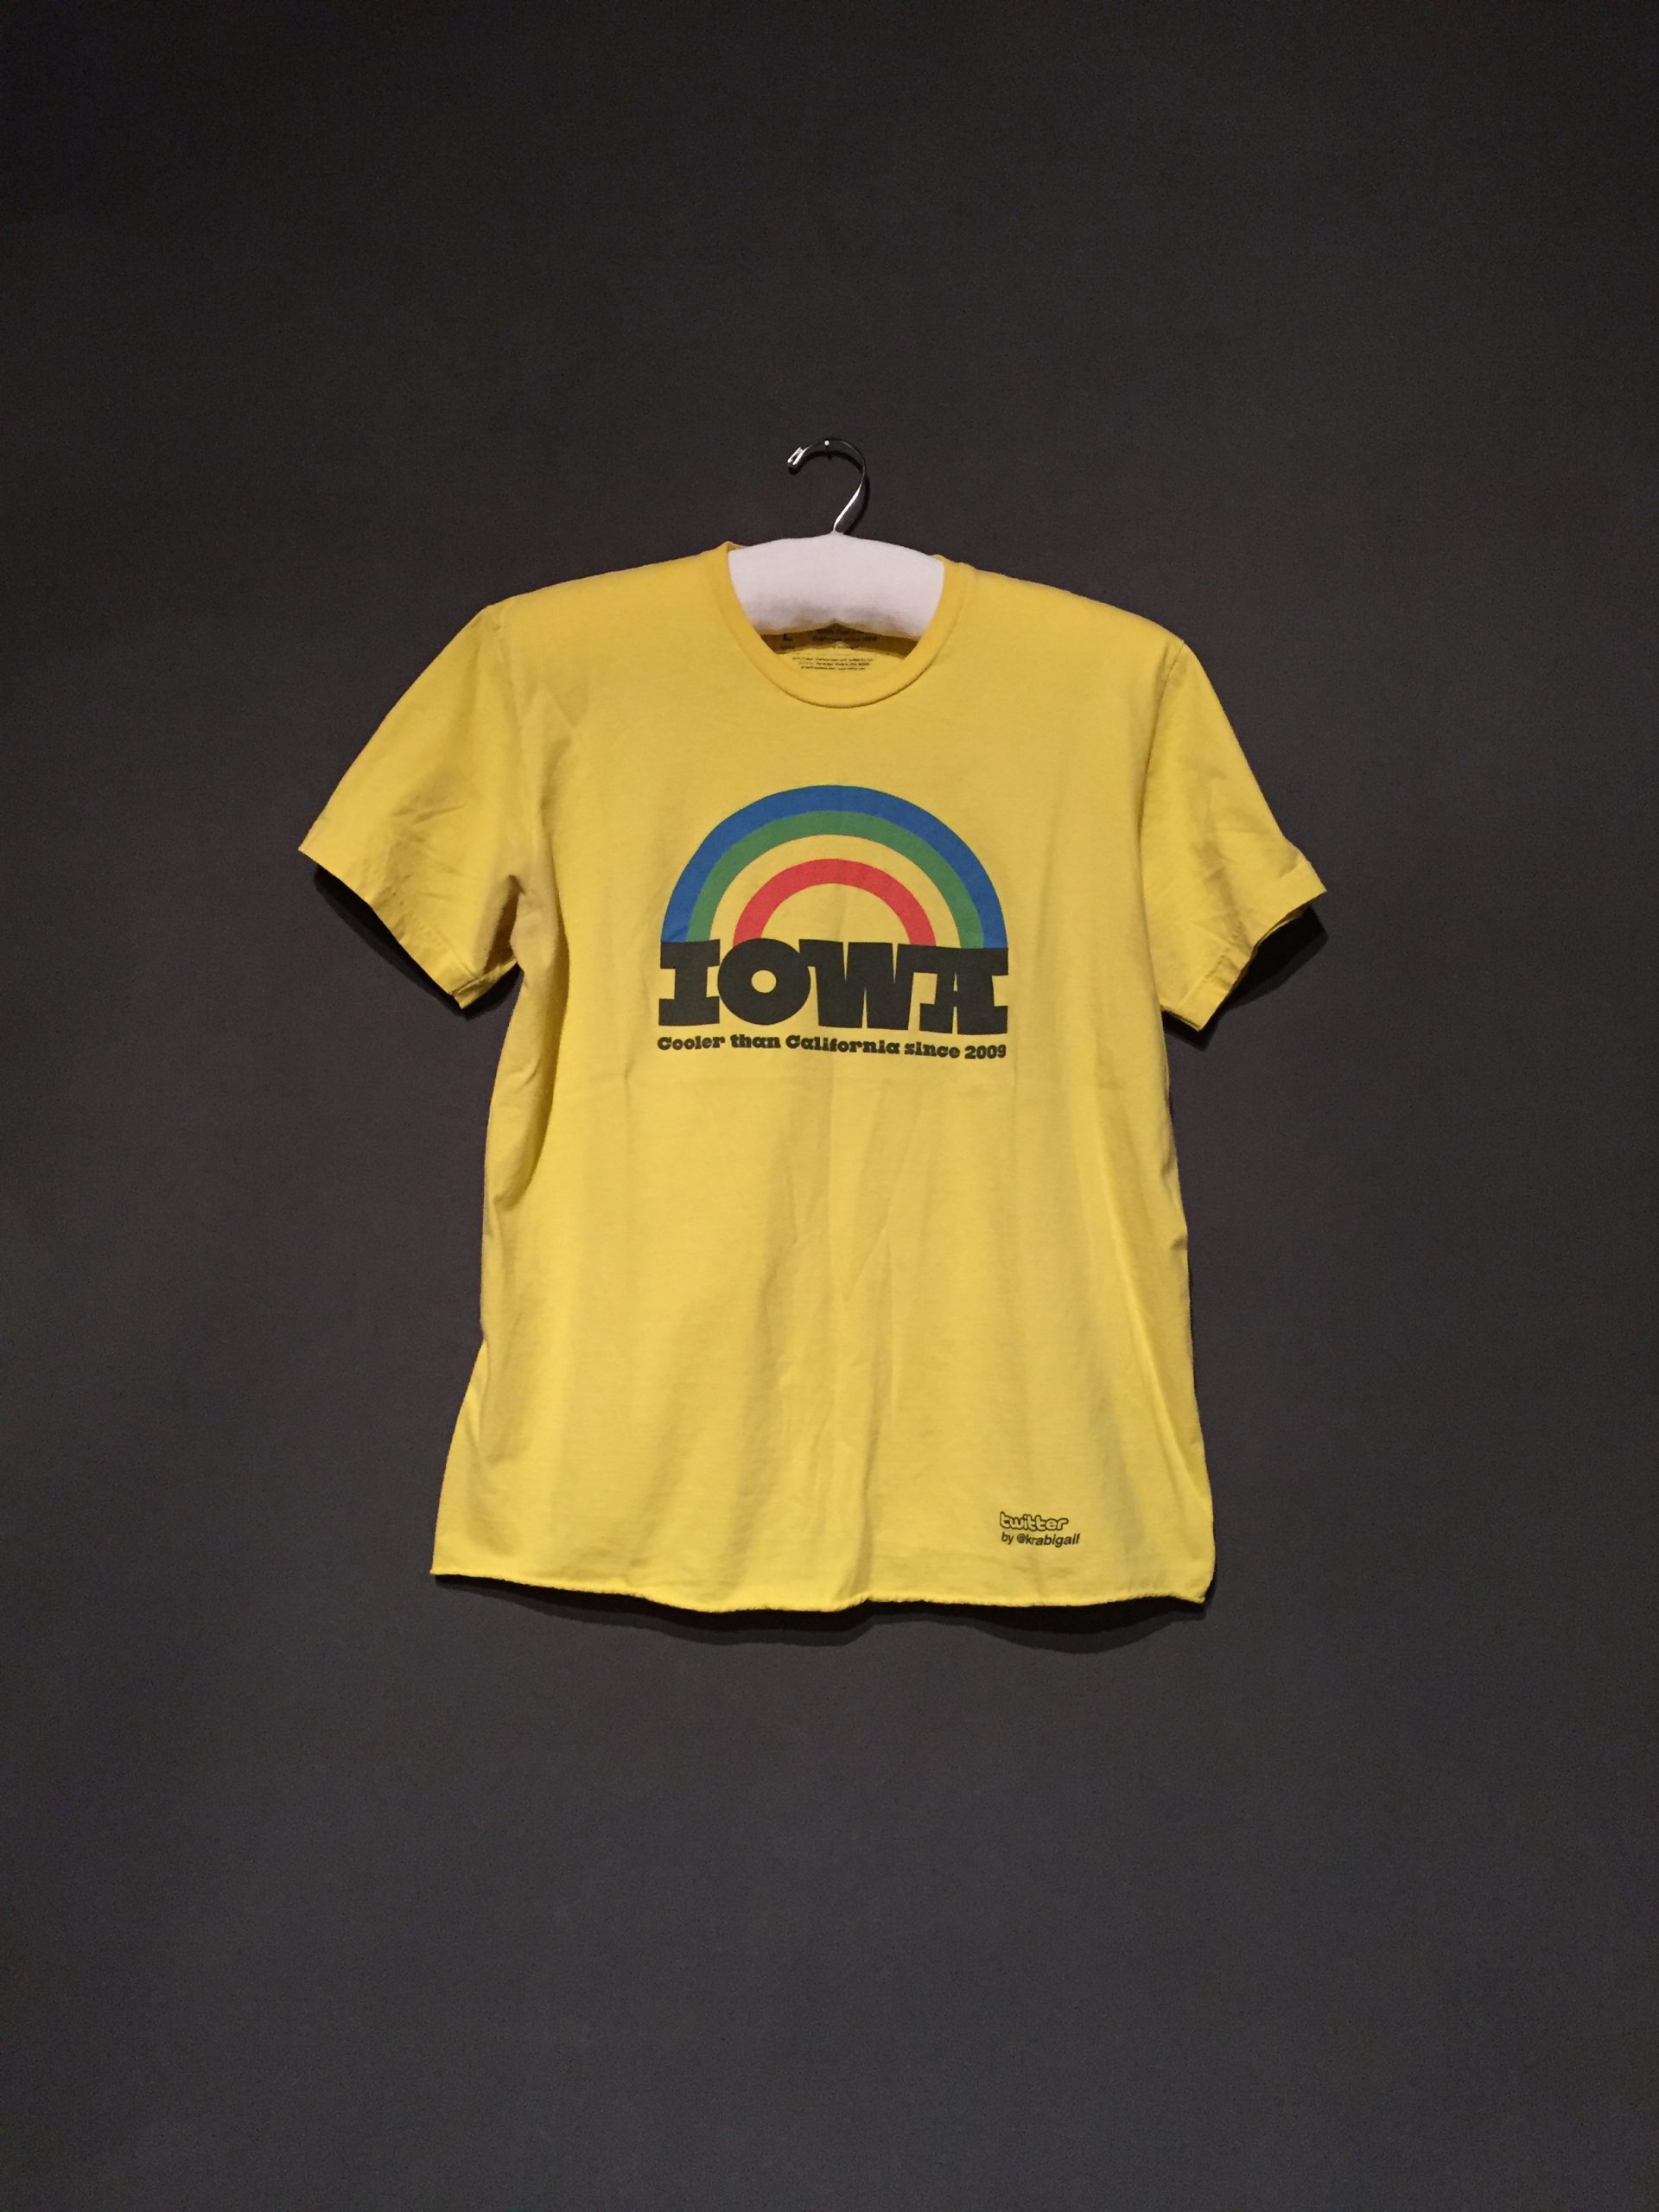 Yellow short sleeve t-shirt with a rainbow and black text reading: "Iowa: Cooler Than California Since 2009"